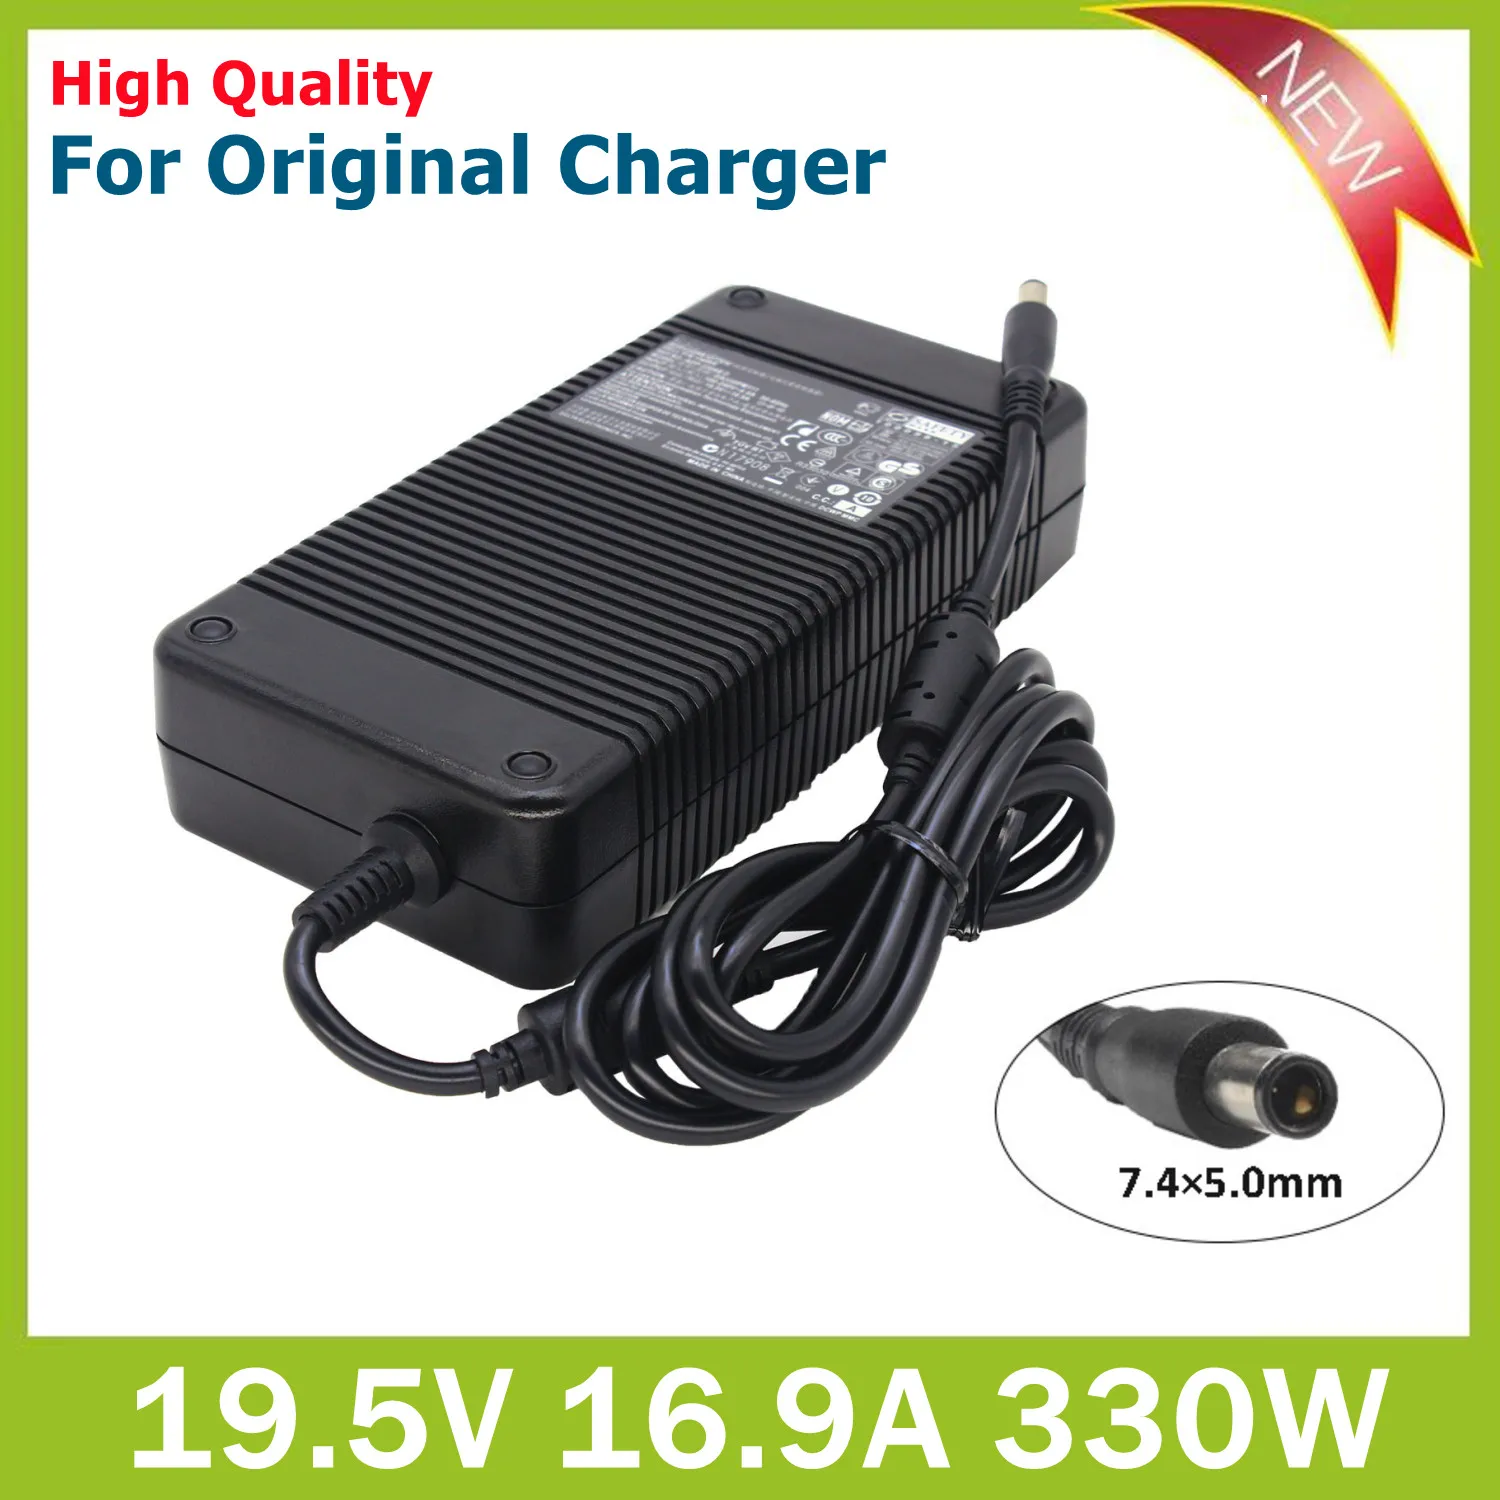 19.5V 16.9A 330W ADP-330AB D AC Laptop Charger Adapter for Dell Alienware M18X R1 R2 R3 17 R1 R4 R5 X51 Y90RR Power Supply enlarge